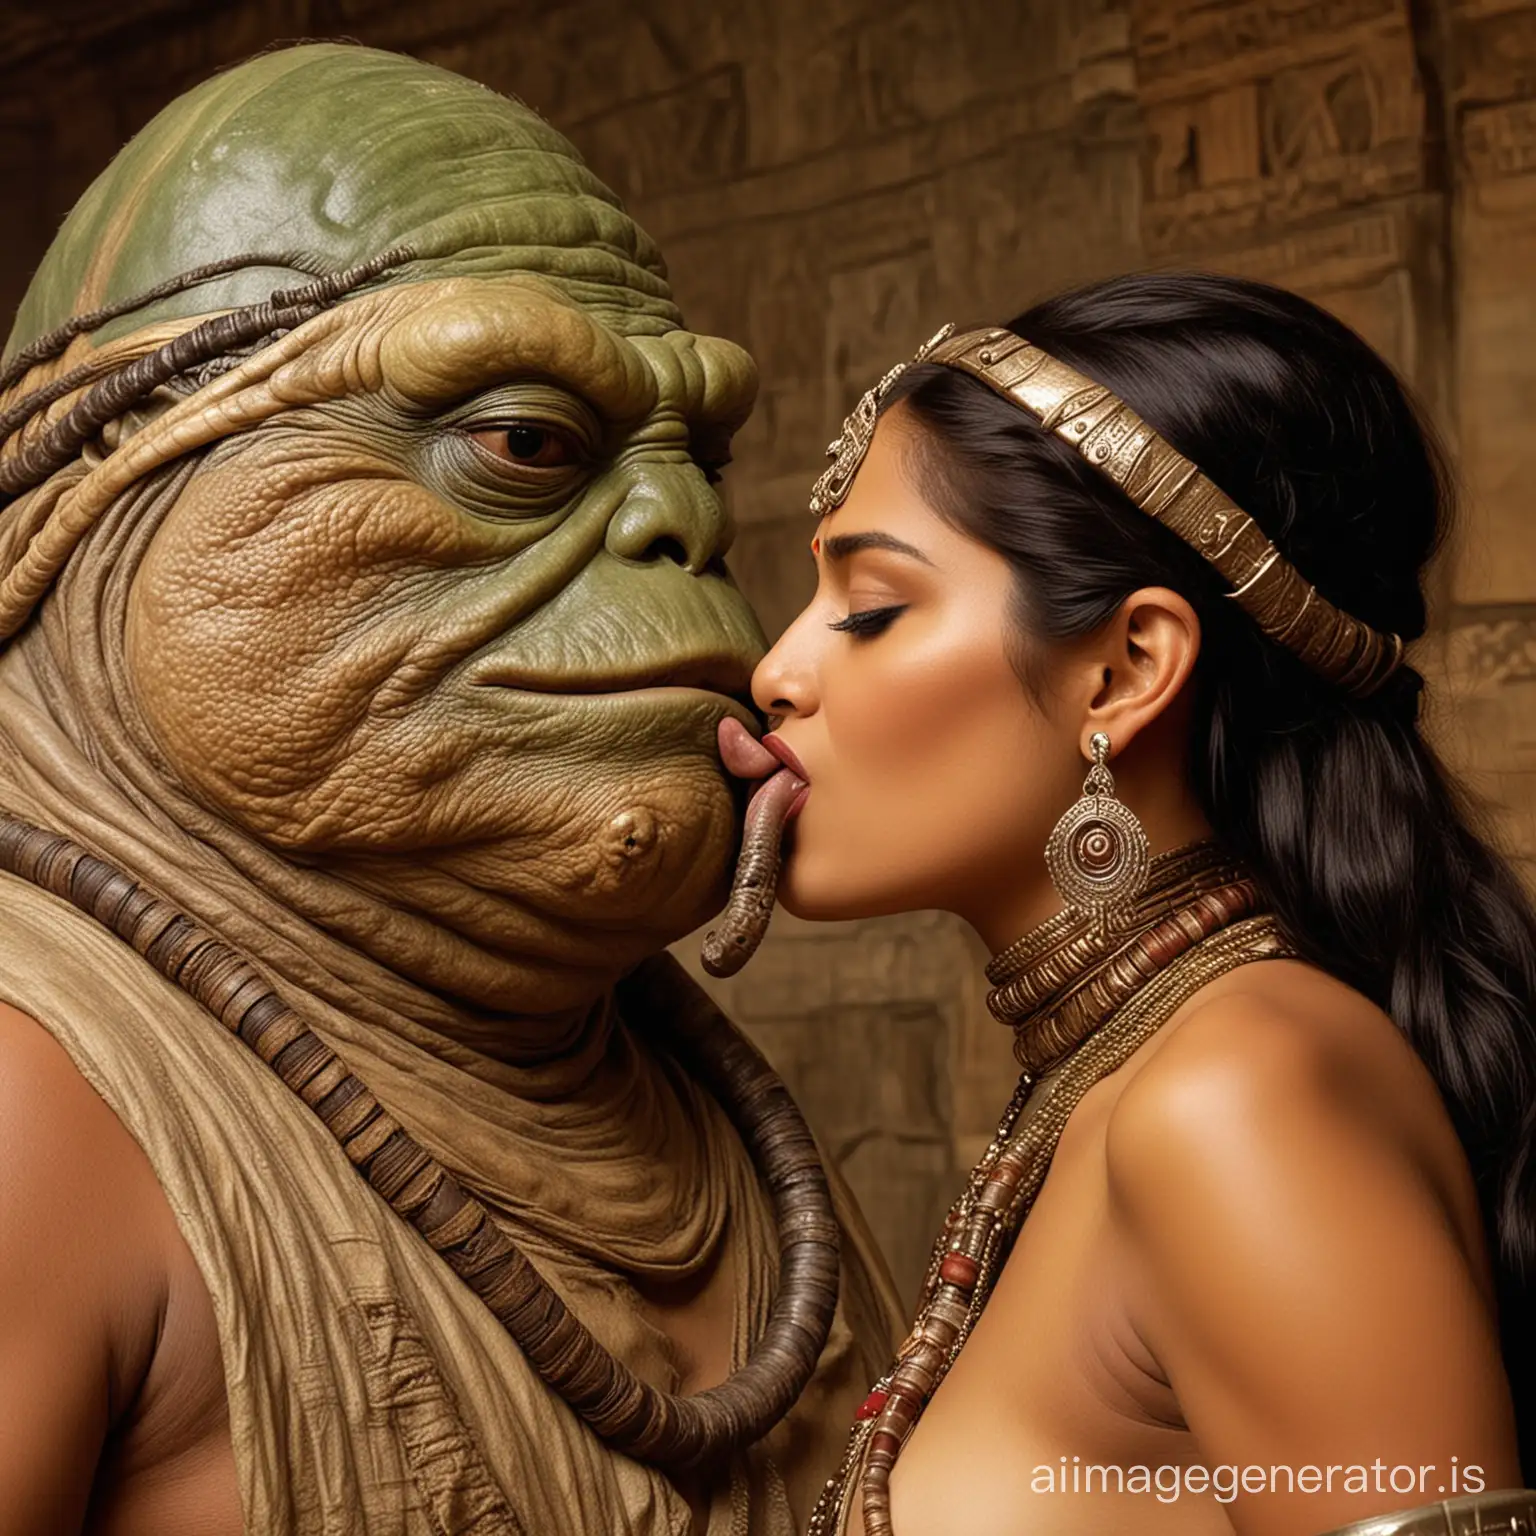 Jabba the Hutt with his serpent tongue kisses the beautiful enslaved Indian Princess